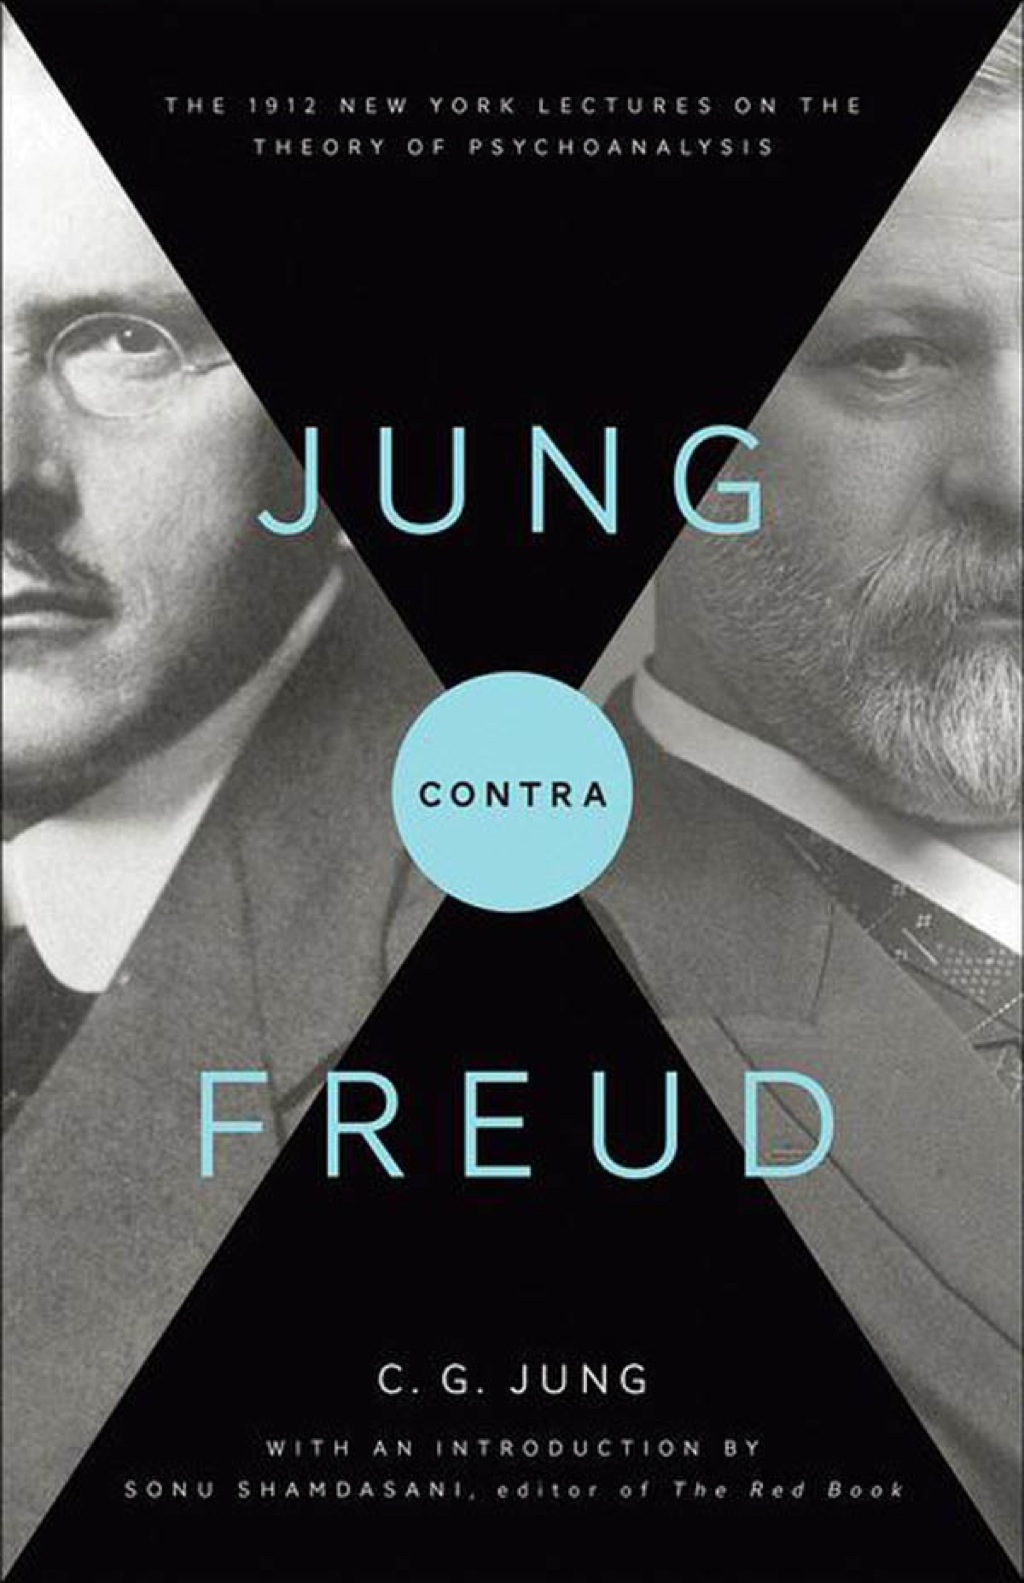 ISBN 9780691154183 product image for Jung contra Freud (eBook) | upcitemdb.com